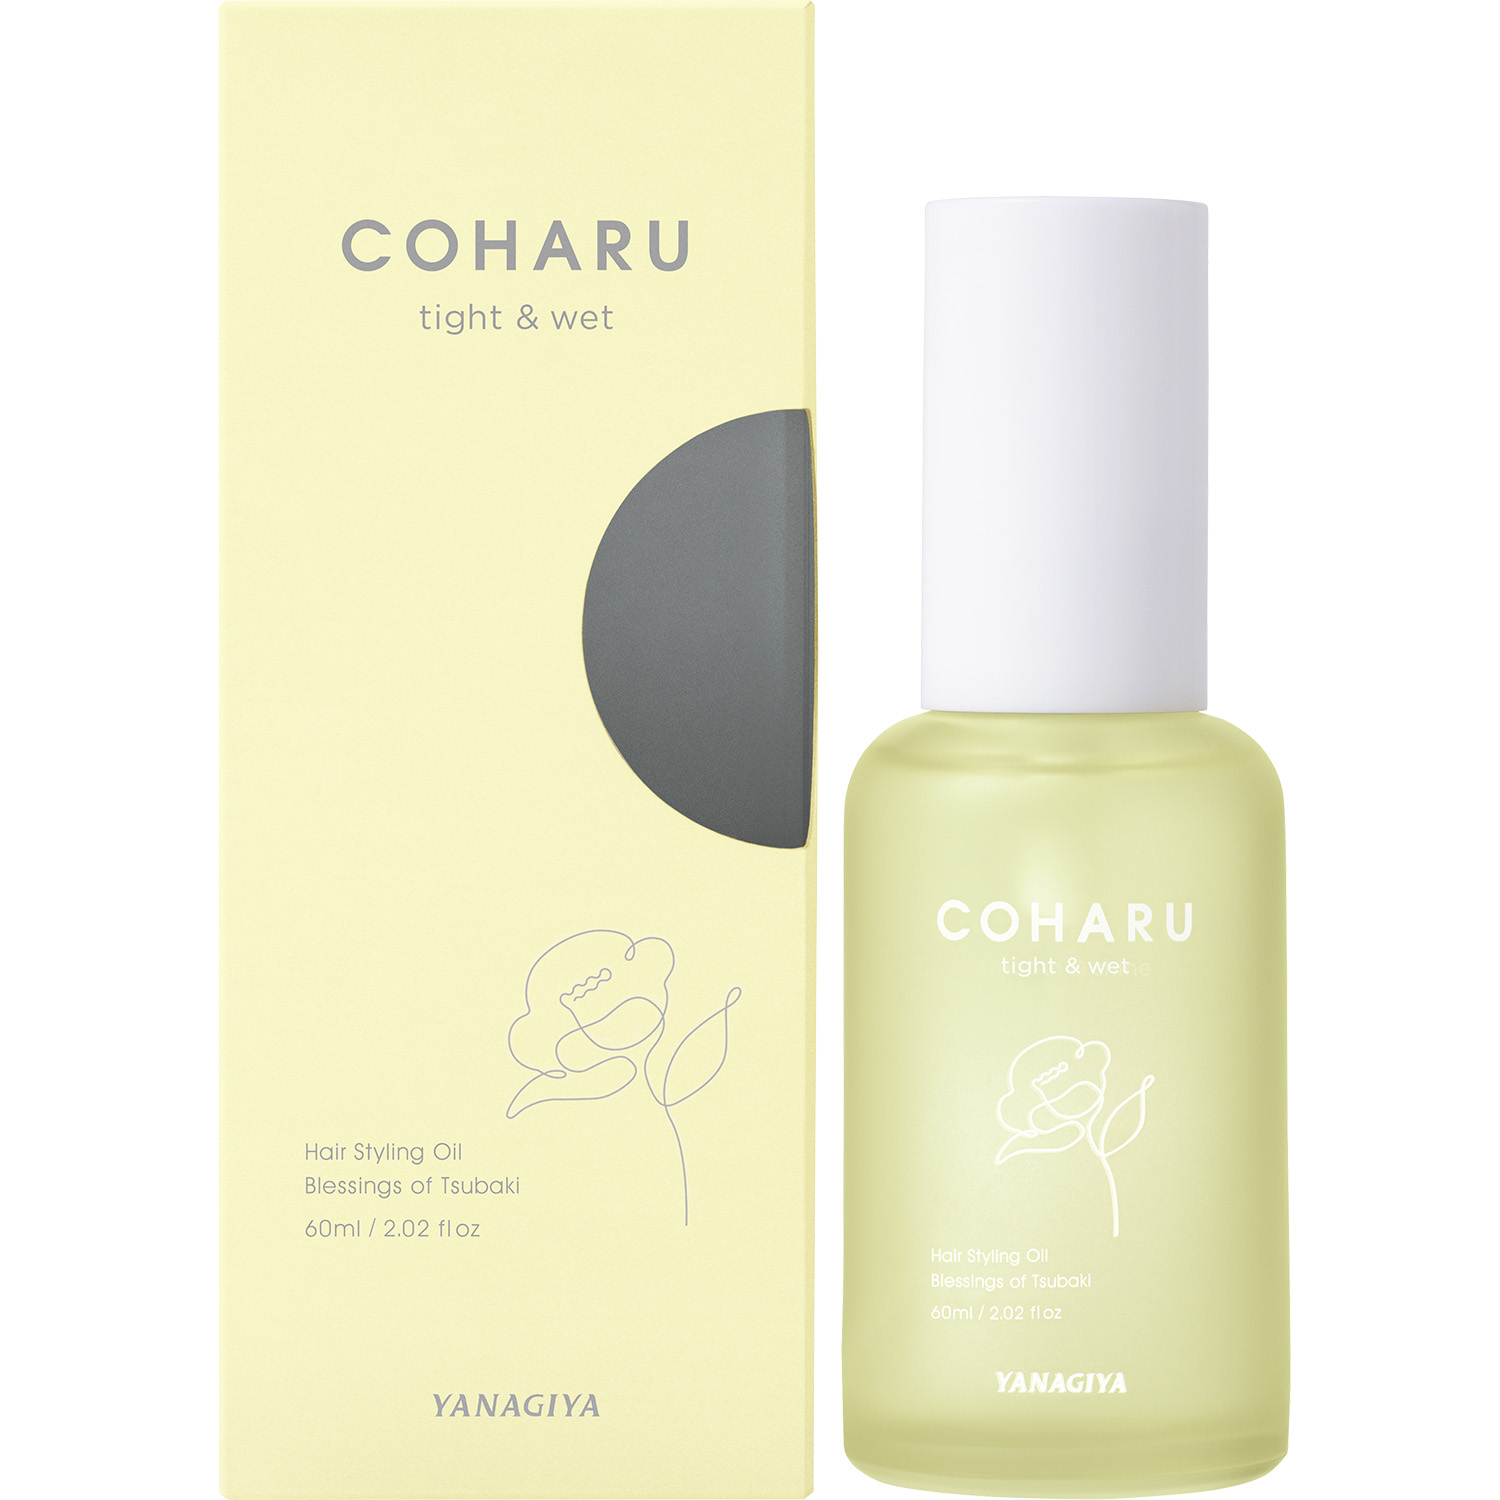 COHARU hair styling oil <tight & wet>